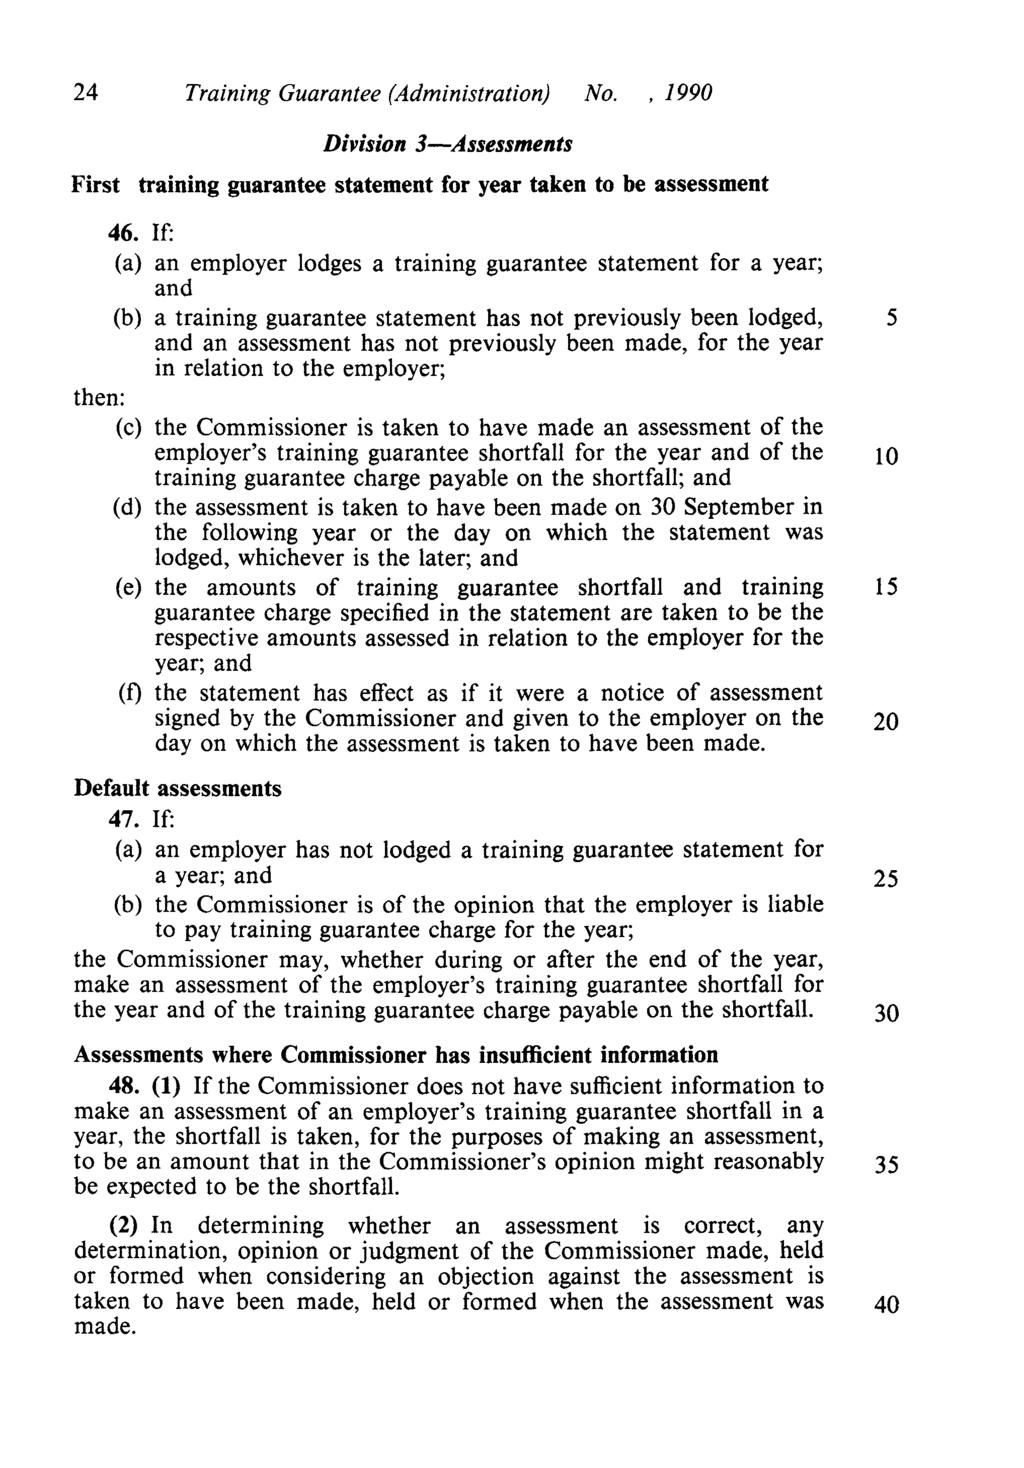 24 Training Guarantee (Administration) No.,1990 Division 3-Assessments First training guarantee statement for year taken to be assessment 46.